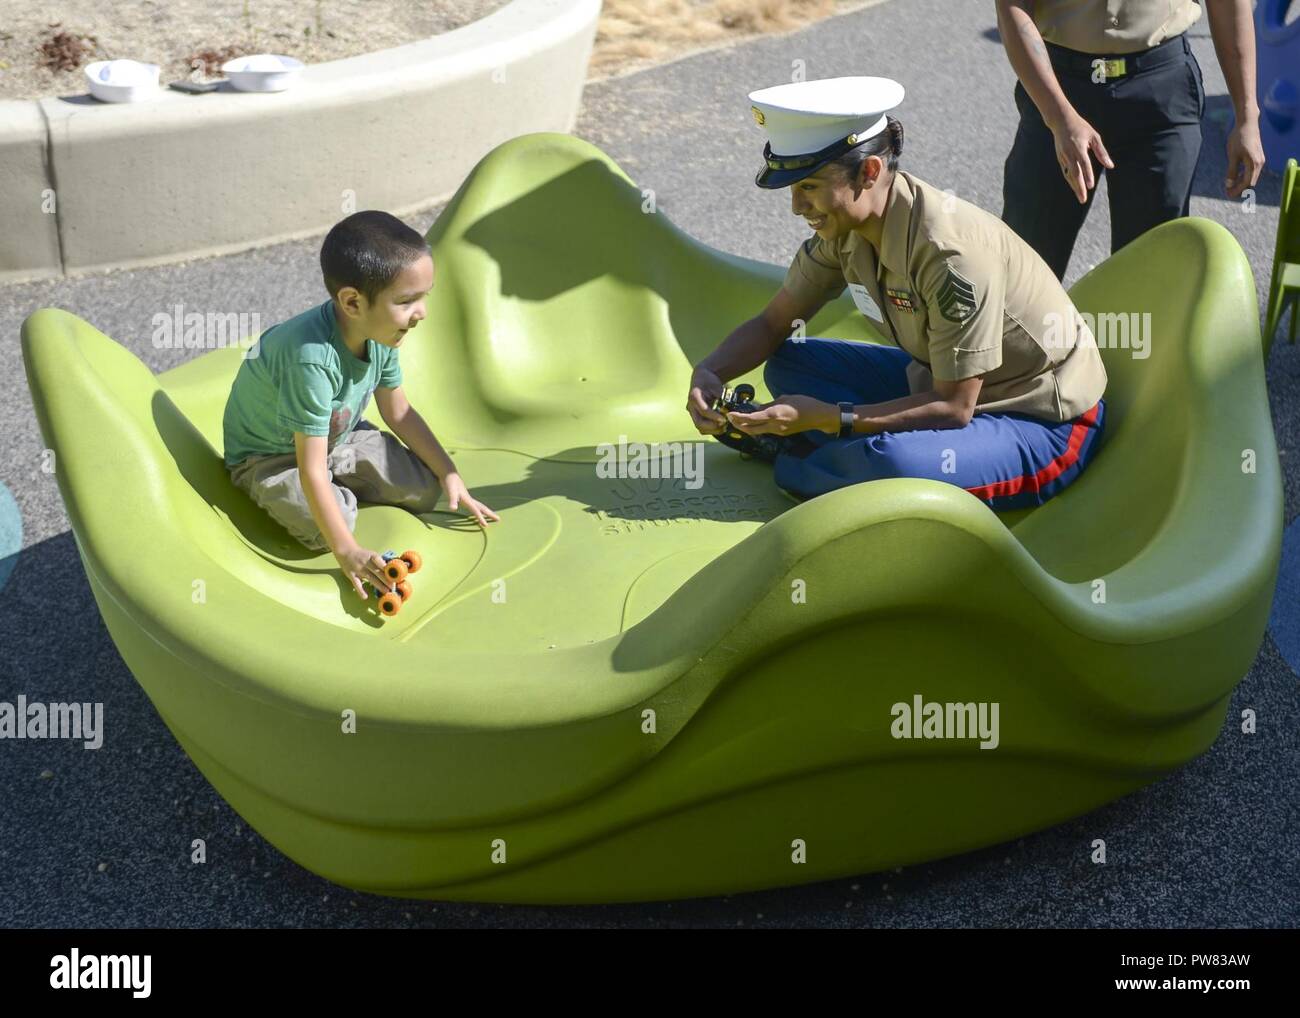 SAN FRANCISCO (Oct. 3, 2017) Marine Staff Sgt. Erika Gongora plays with a patient at University of California San Francisco Benioff Children’s Hospital during a Fleet Week San Francisco community outreach event. Fleet Week provides an opportunity for the American public to meet their Navy, Marine Corps, and Coast Guard team and to experience America's sea services. Fleet Week San Francisco will highlight naval personnel, equipment, technology and capabilities, with an emphasis on humanitarian assistance and disaster response. Stock Photo